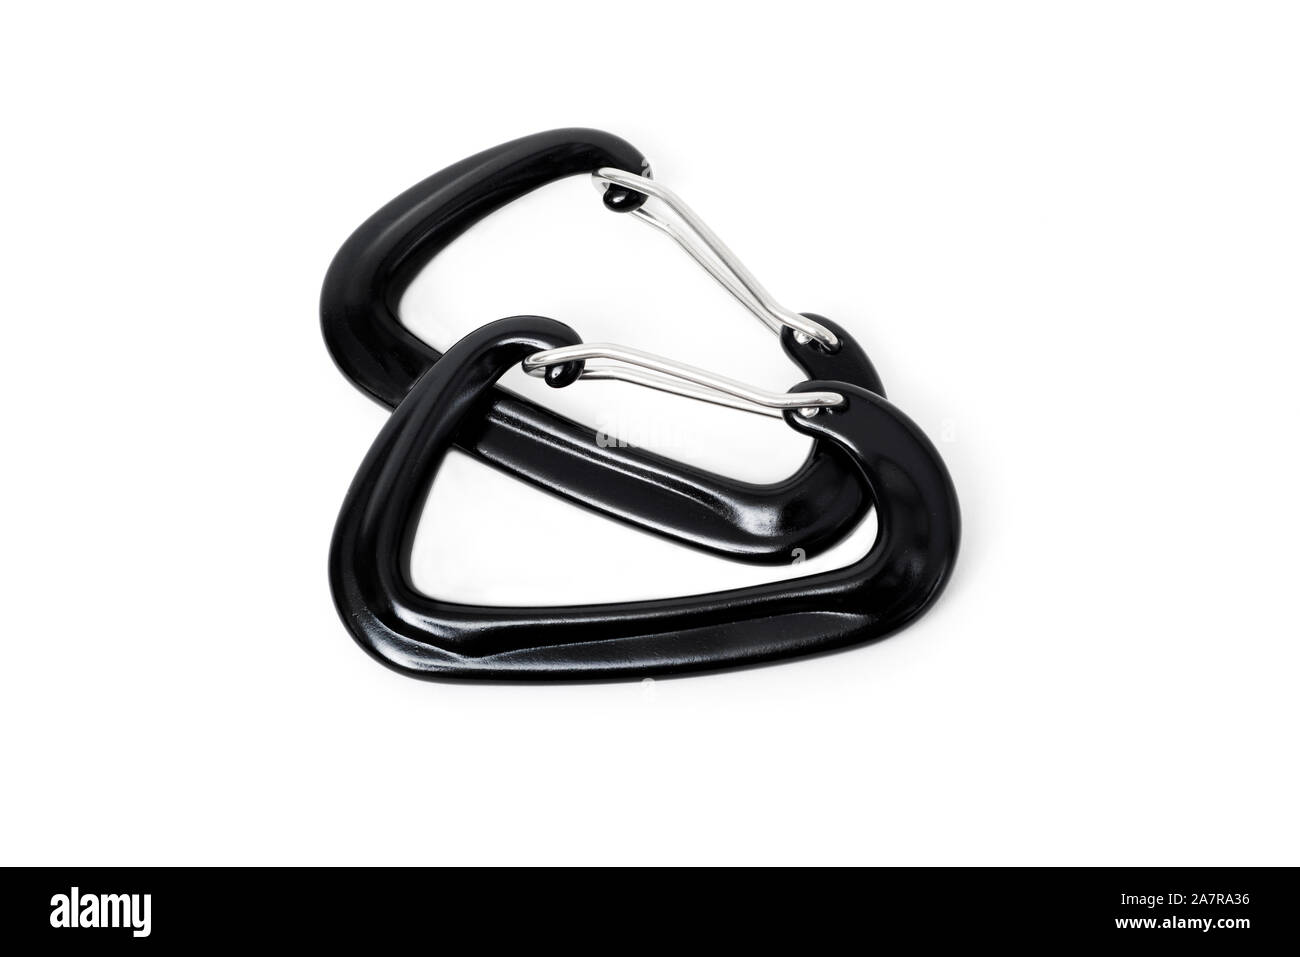 two black aluminium carabiners on a white background Stock Photo